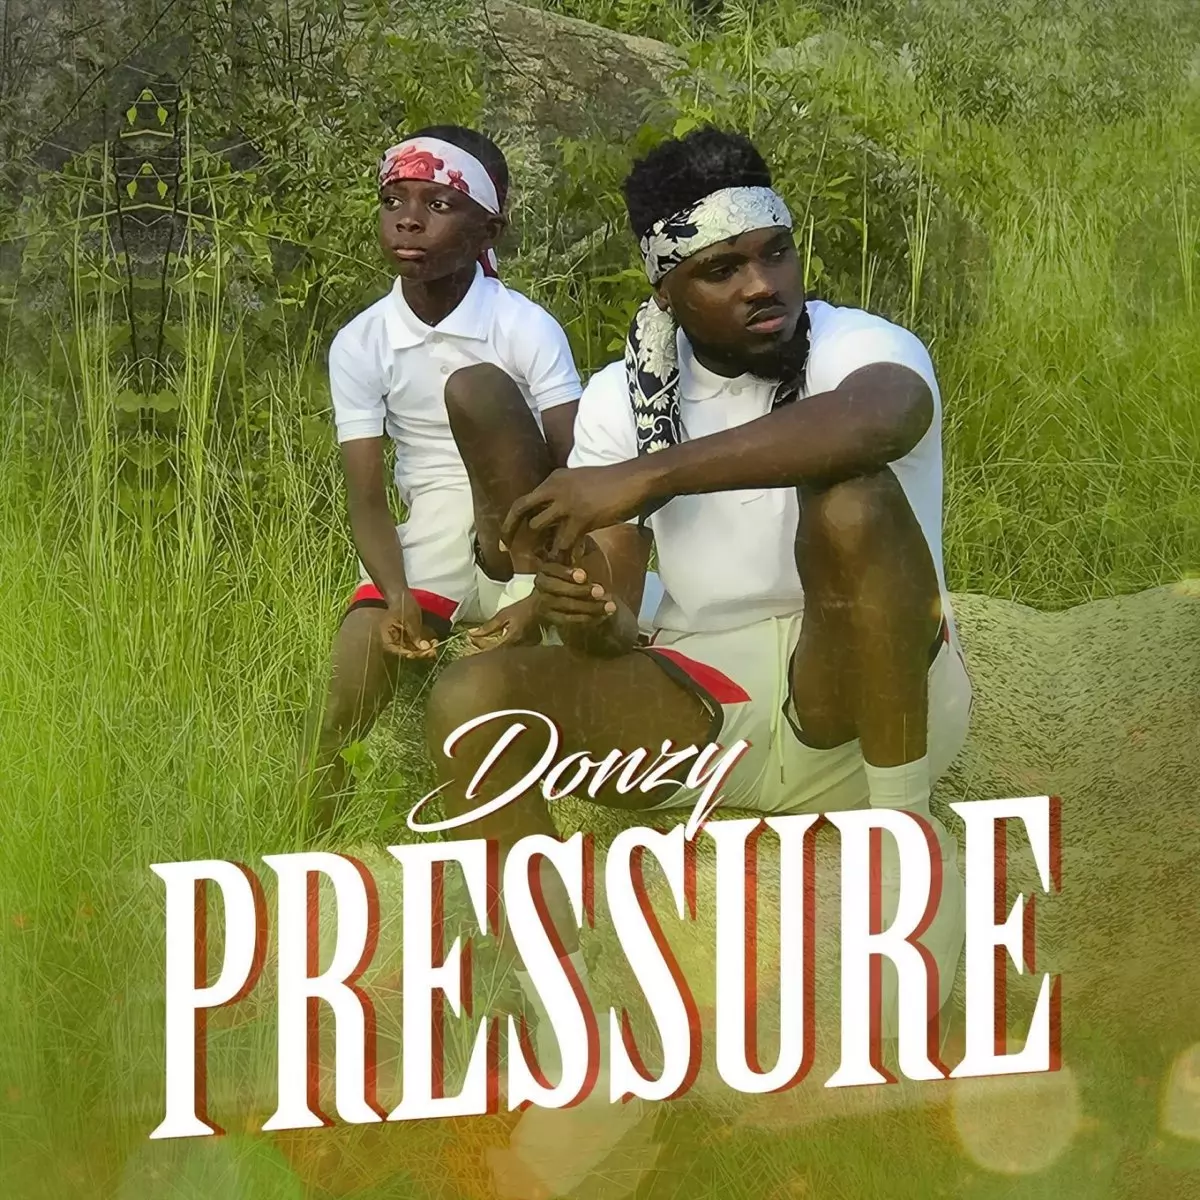 Pressure - Single by Donzy on Apple Music